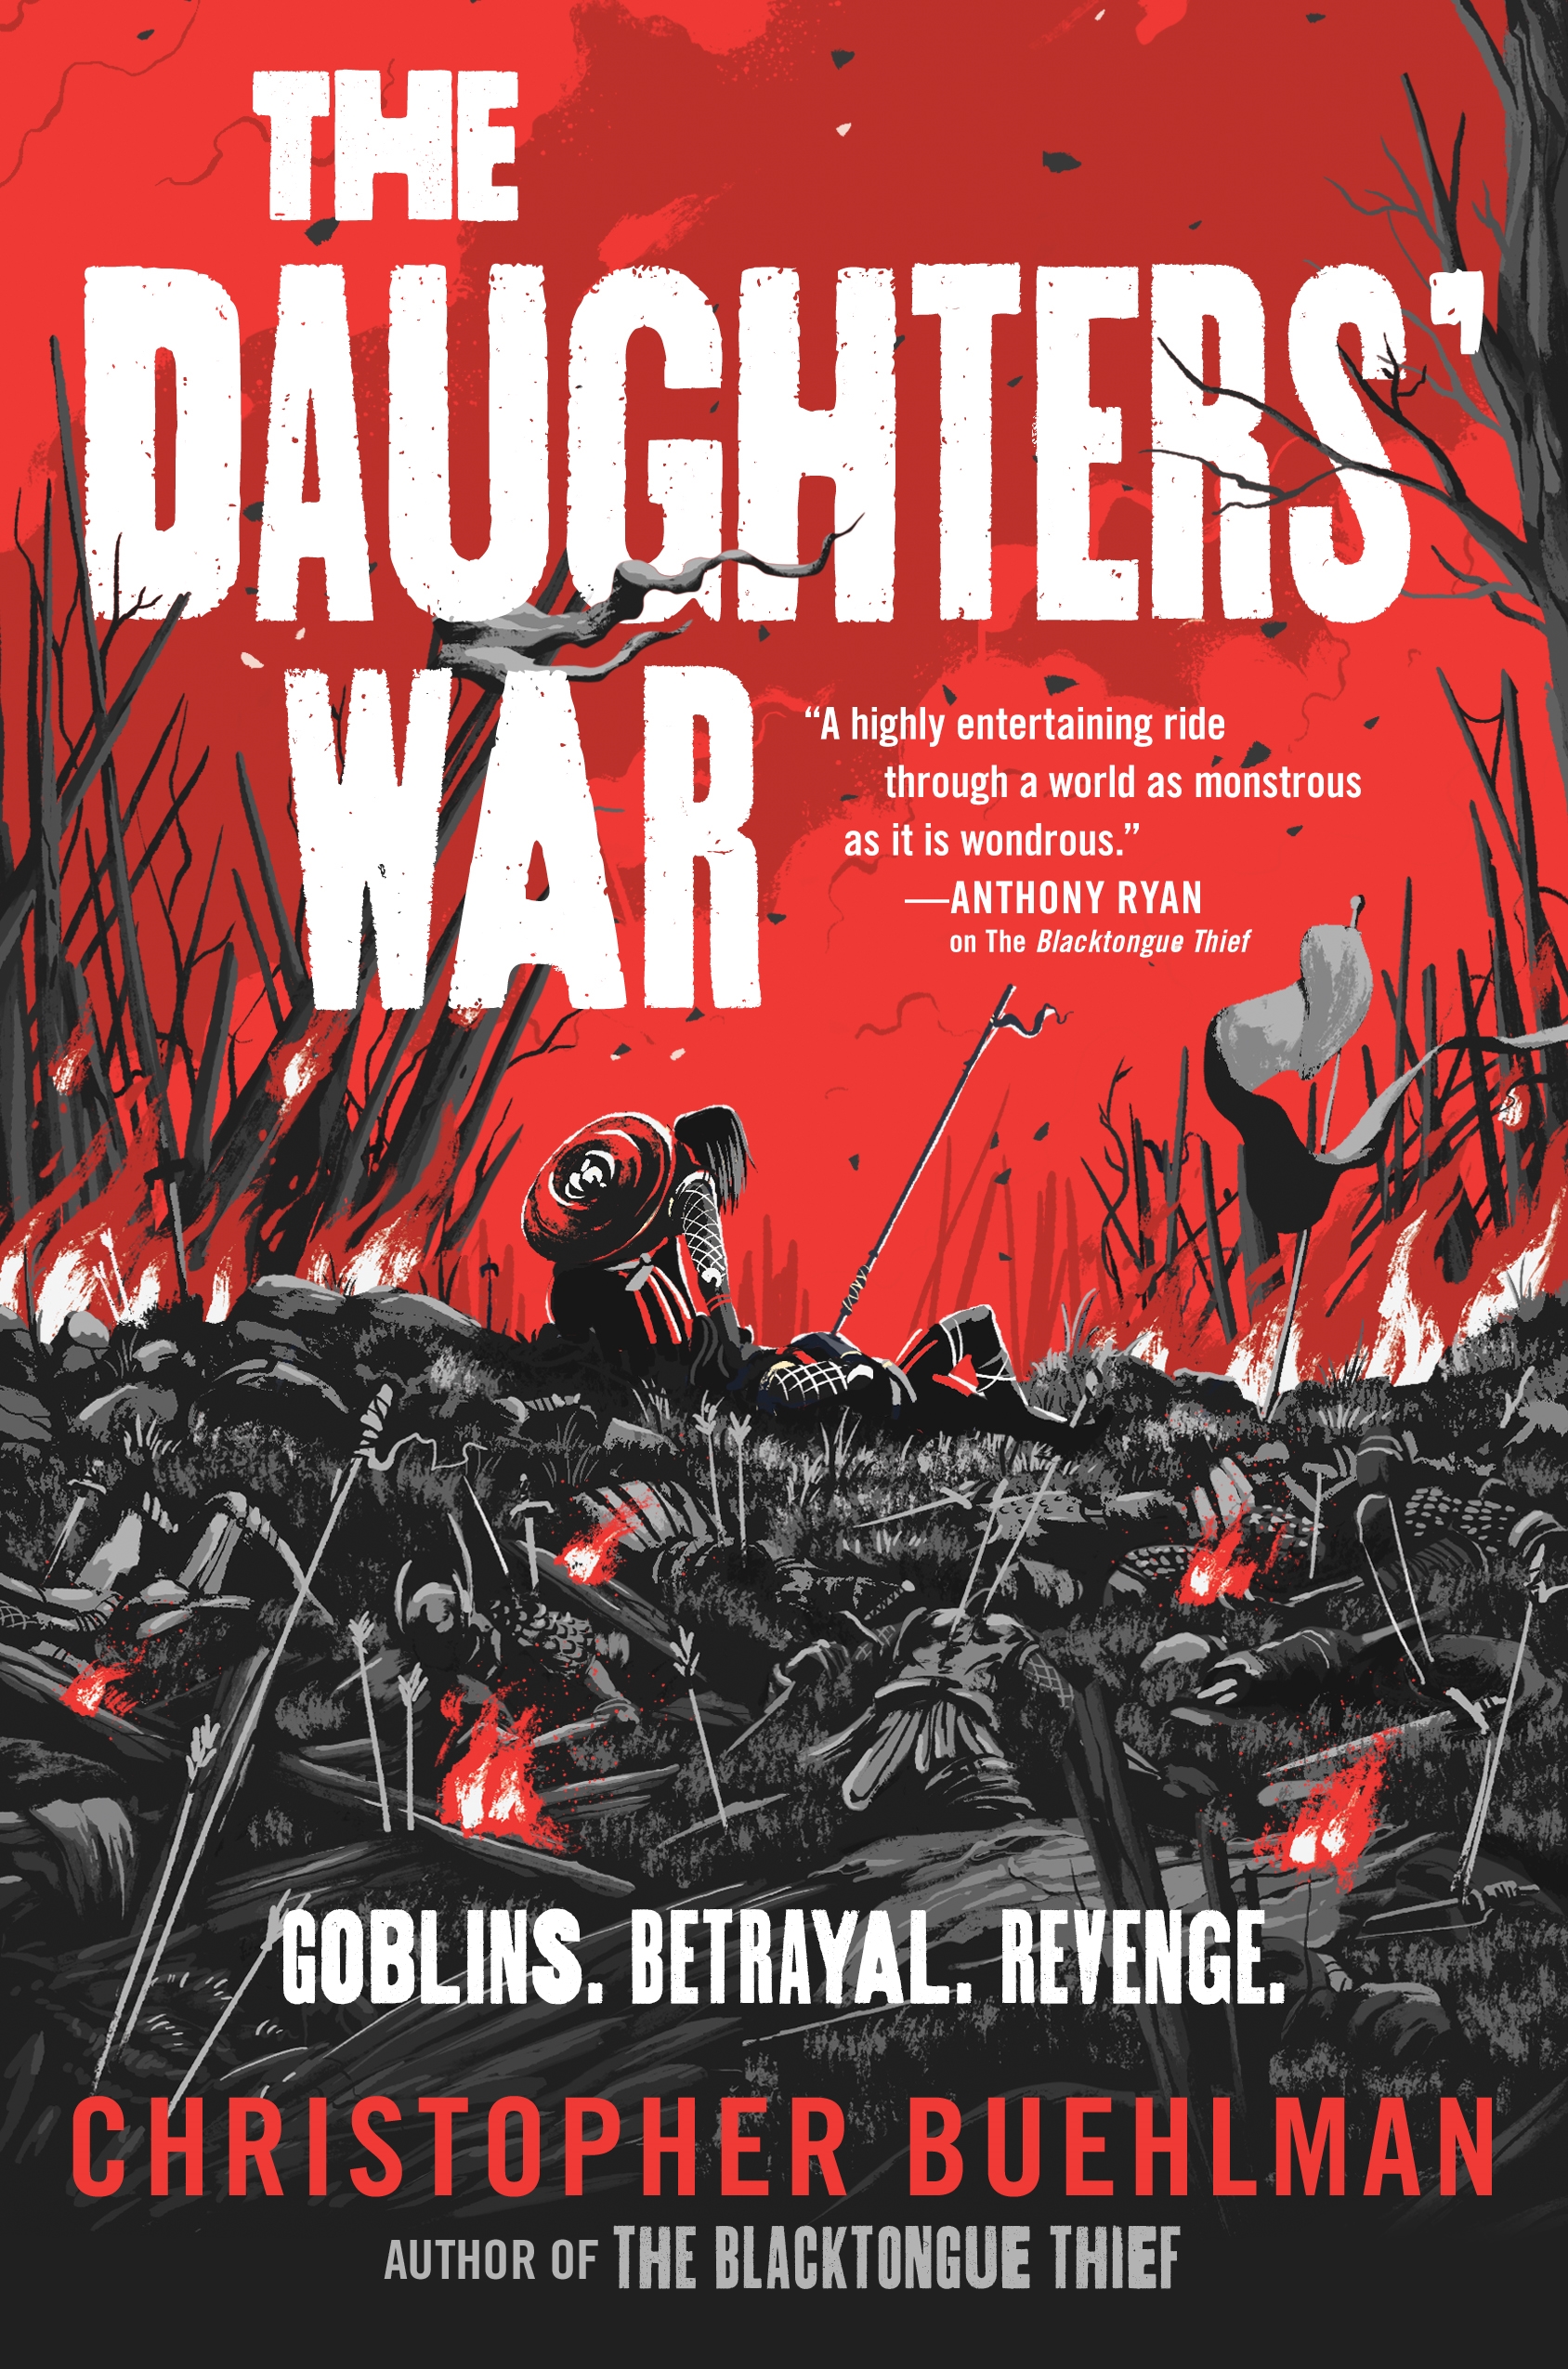 The Daughters' War by Christopher Buehlman